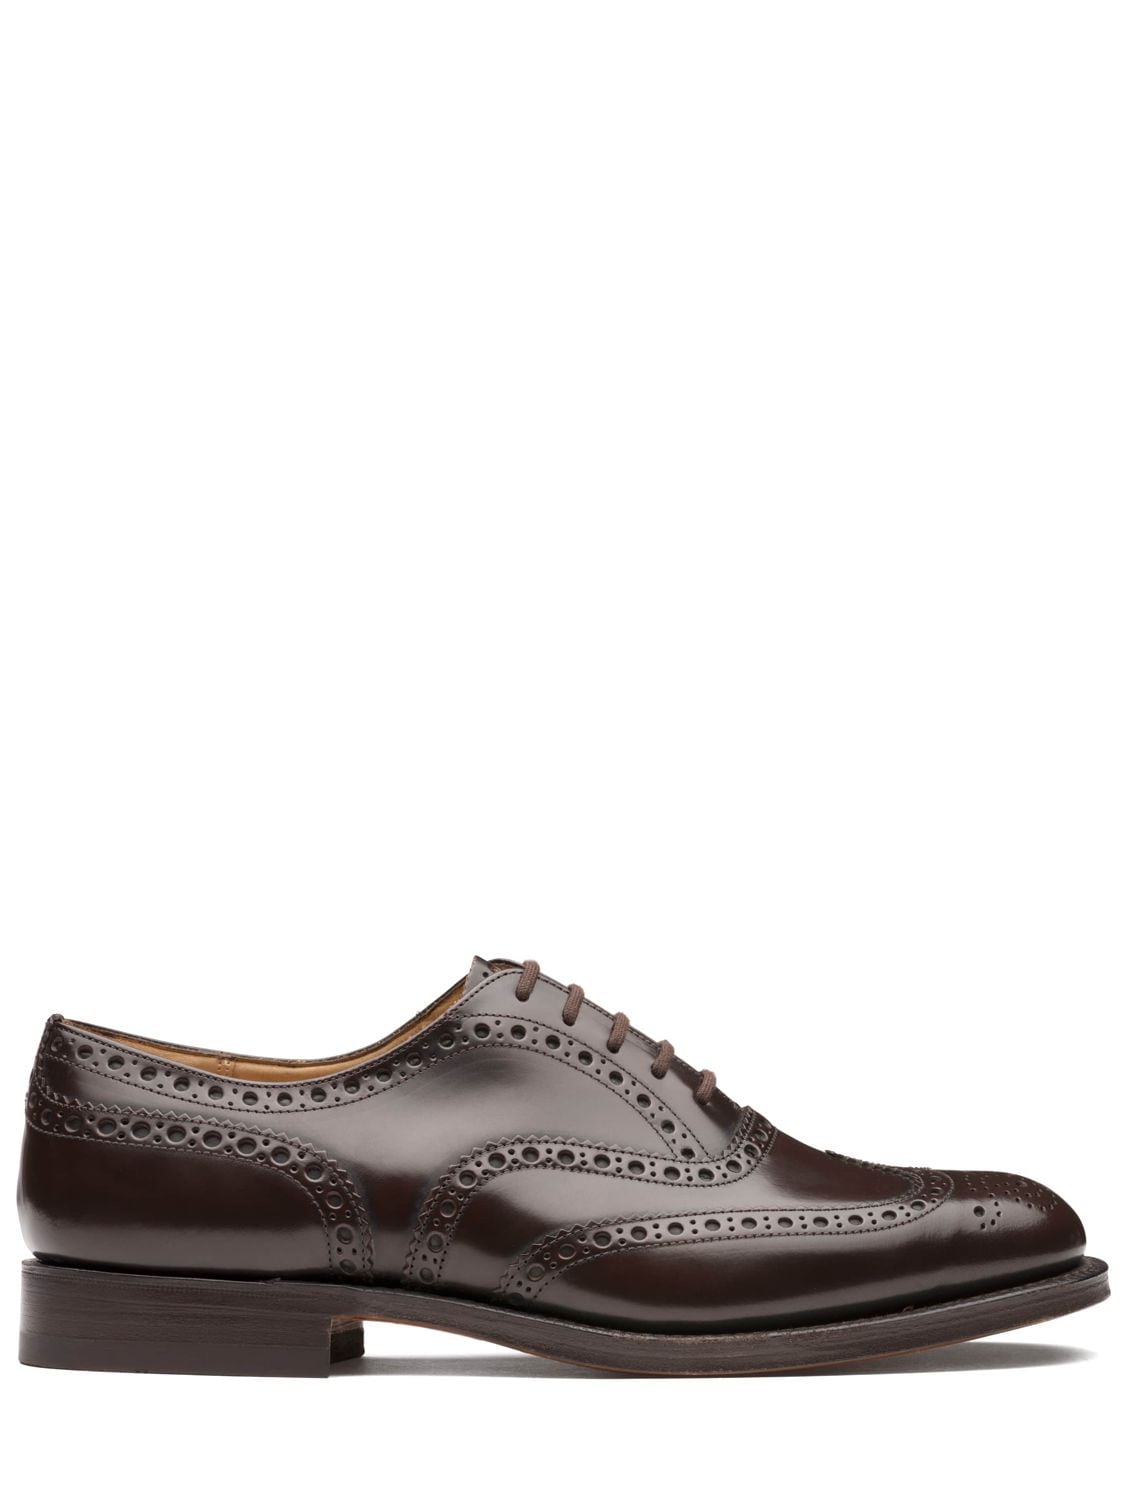 CHURCH'S BURWOOD LACE-UP DERBY SHOES